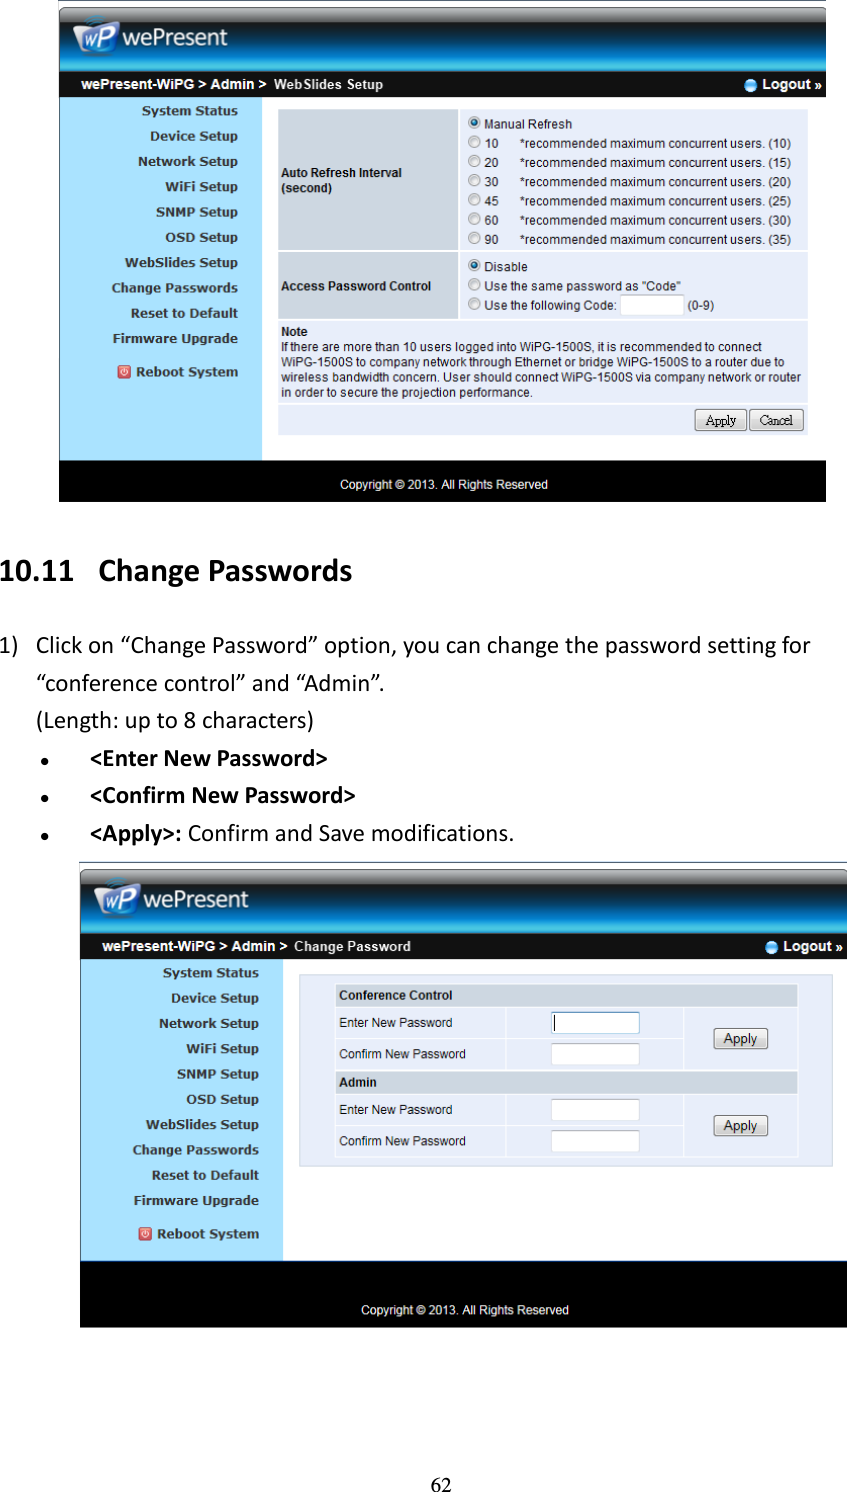   62  10.11 Change Passwords 1) Click on “Change Password” option, you can change the password setting for “conference control” and “Admin”. (Length: up to 8 characters)  &lt;Enter New Password&gt;  &lt;Confirm New Password&gt;  &lt;Apply&gt;: Confirm and Save modifications.   